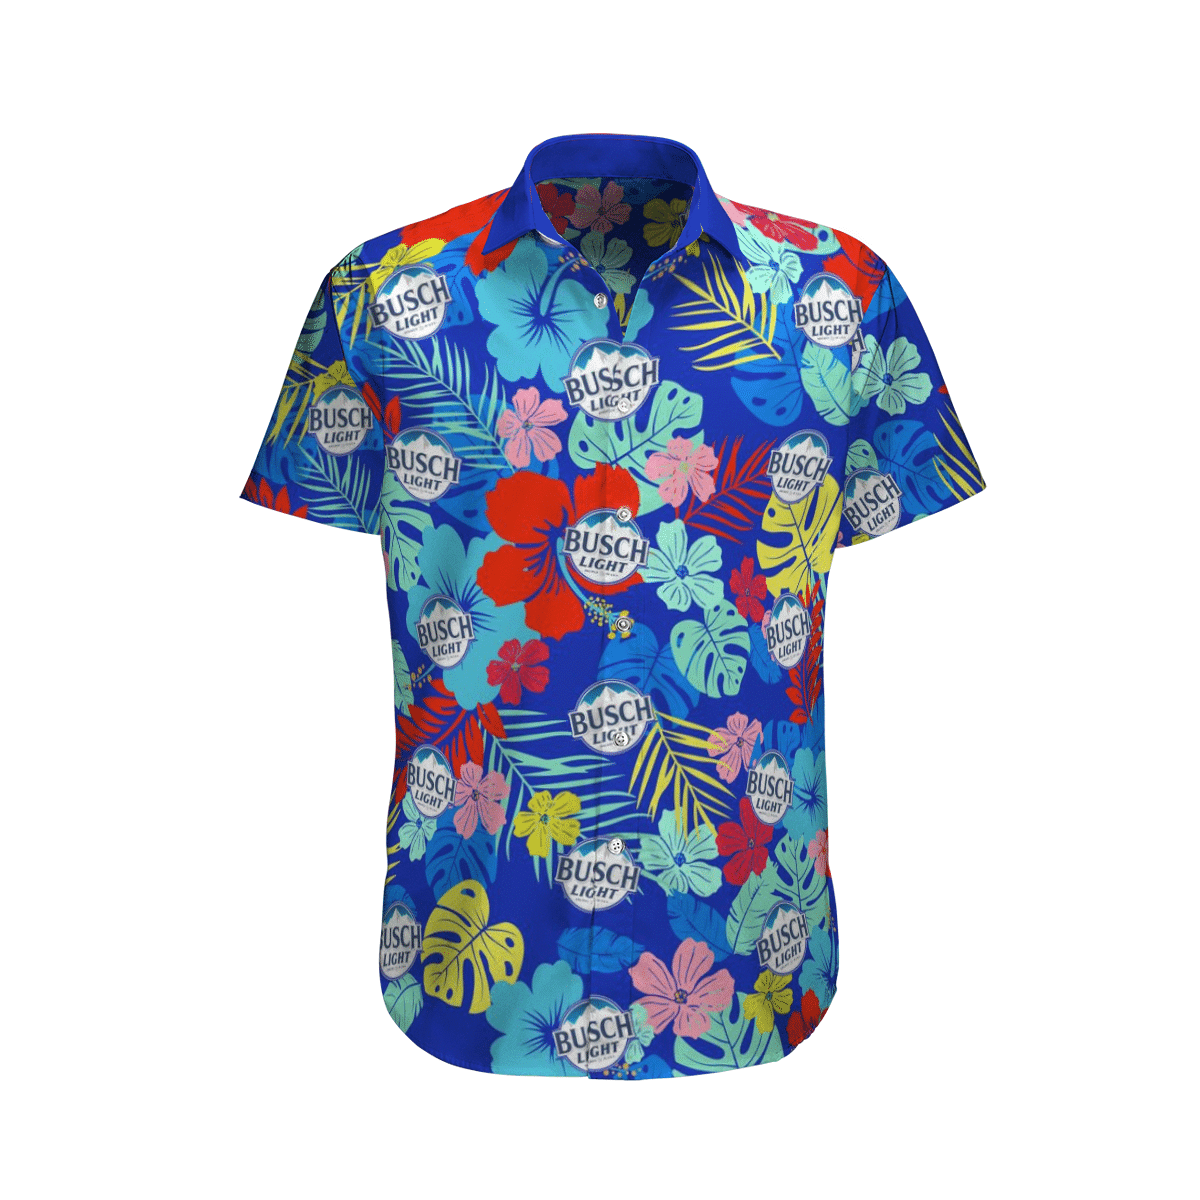 Top cool Hawaiian shirt 2022 - Make sure you get yours today before they run out! 9